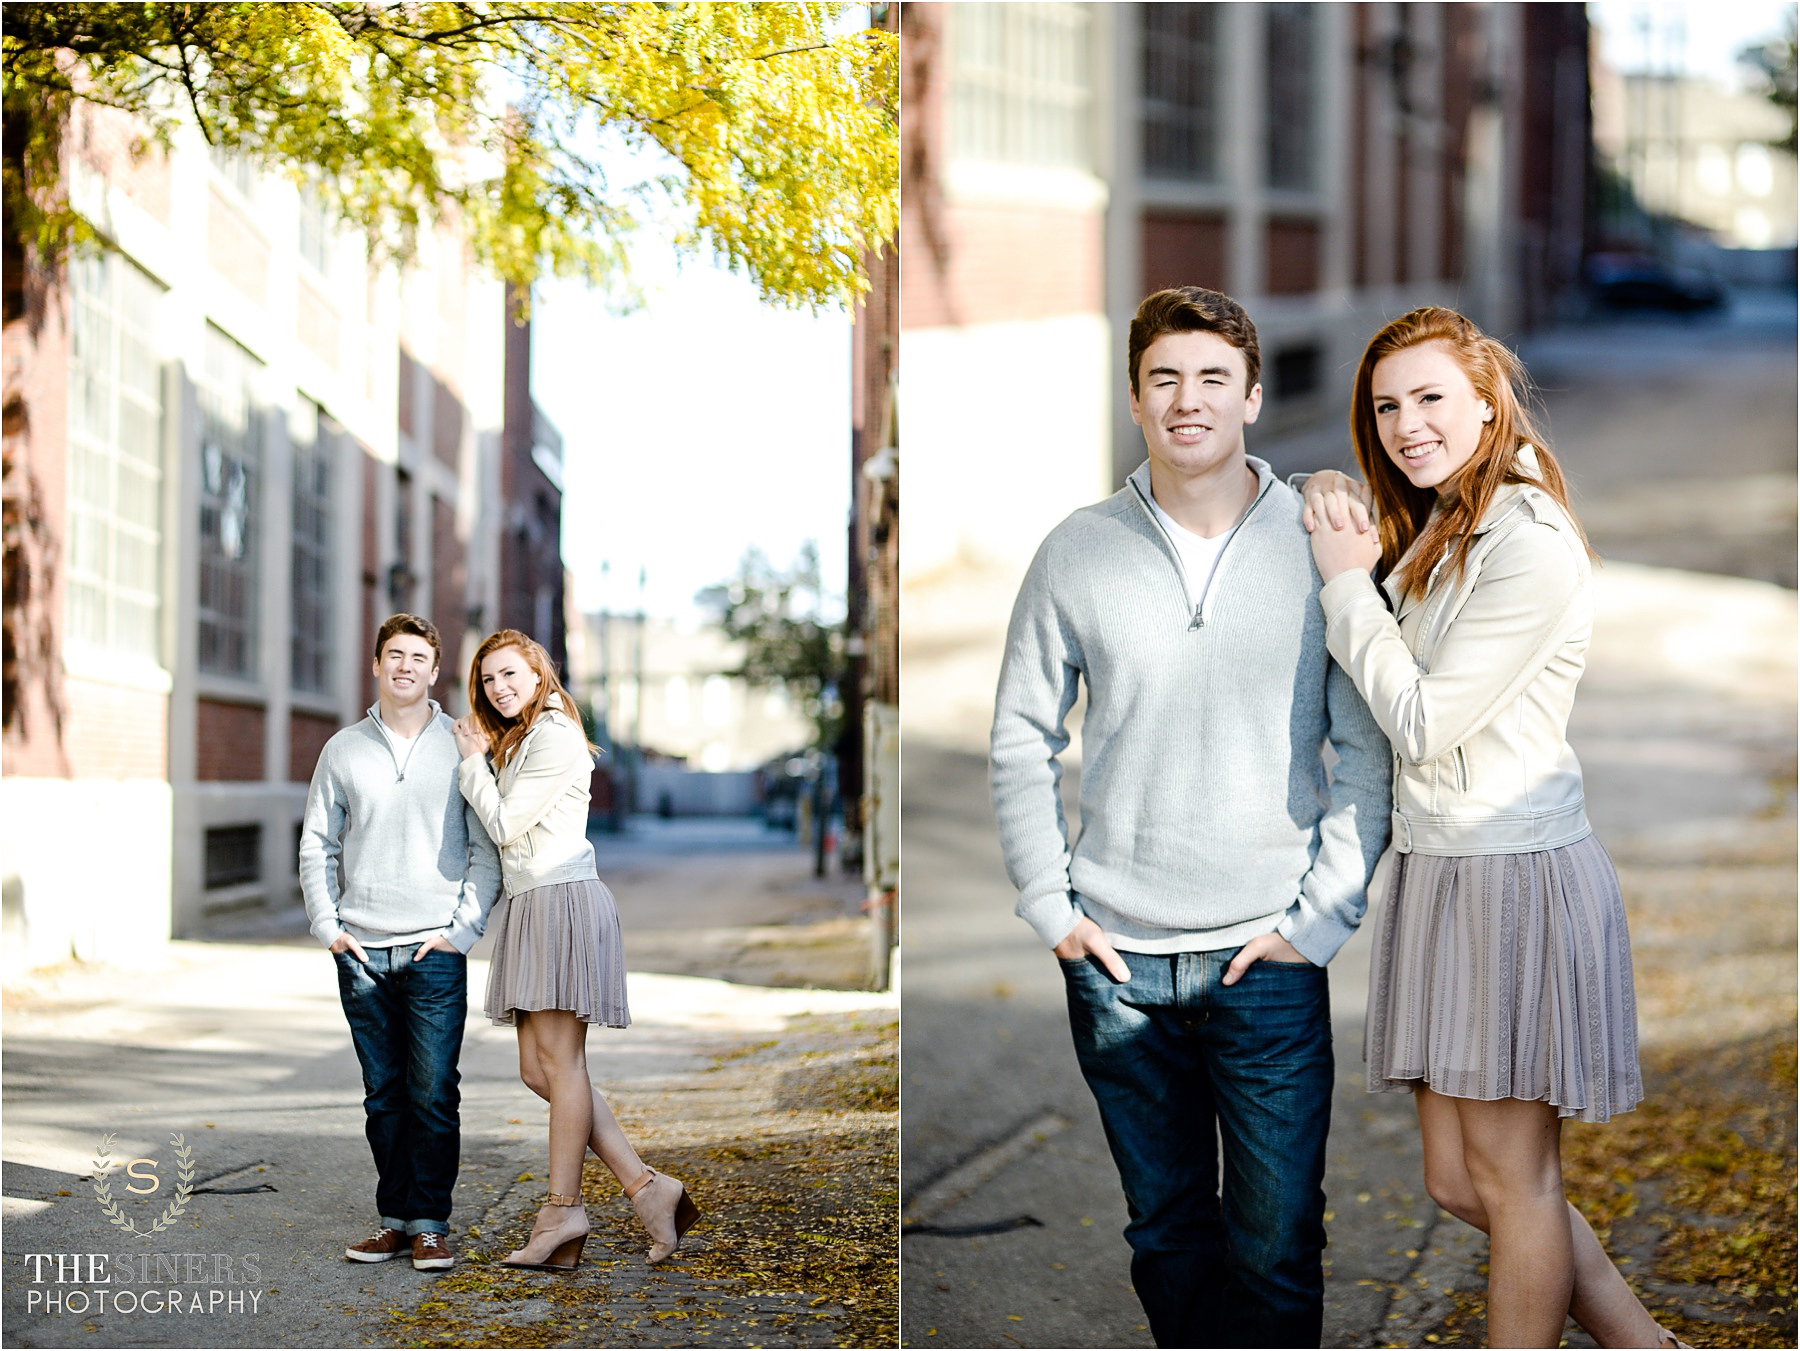 Hickey Family_Indianapolis Family Photographer_TheSinersPhotography_0006